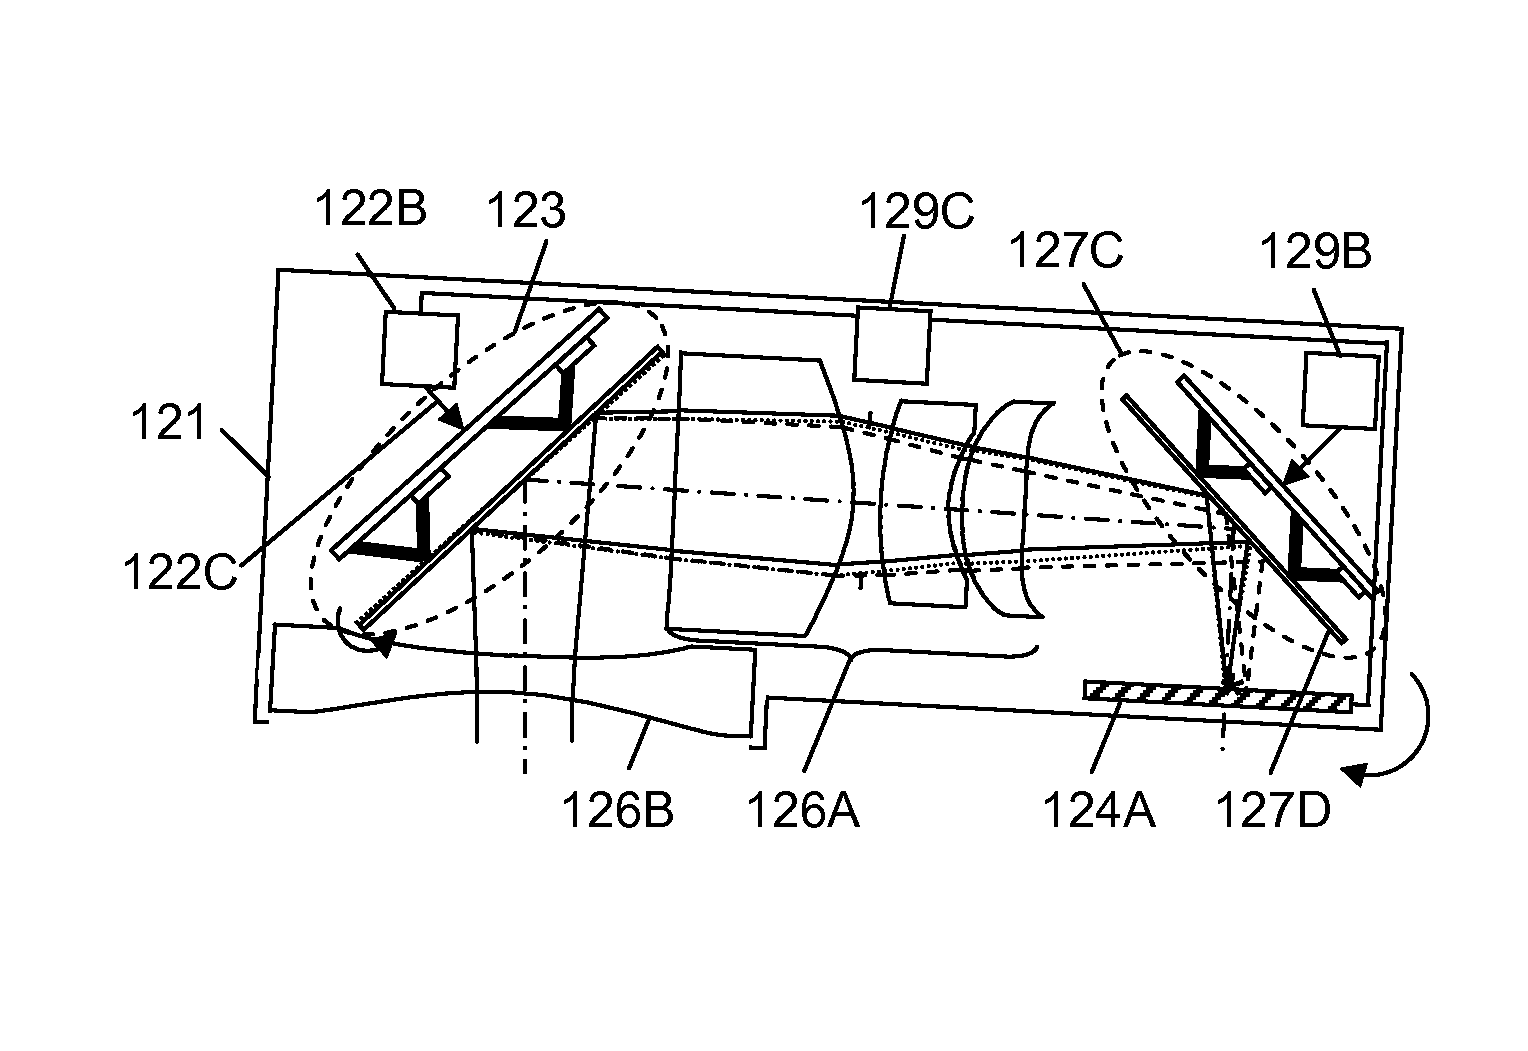 Optical system with optical image stabilization using a MEMS mirror